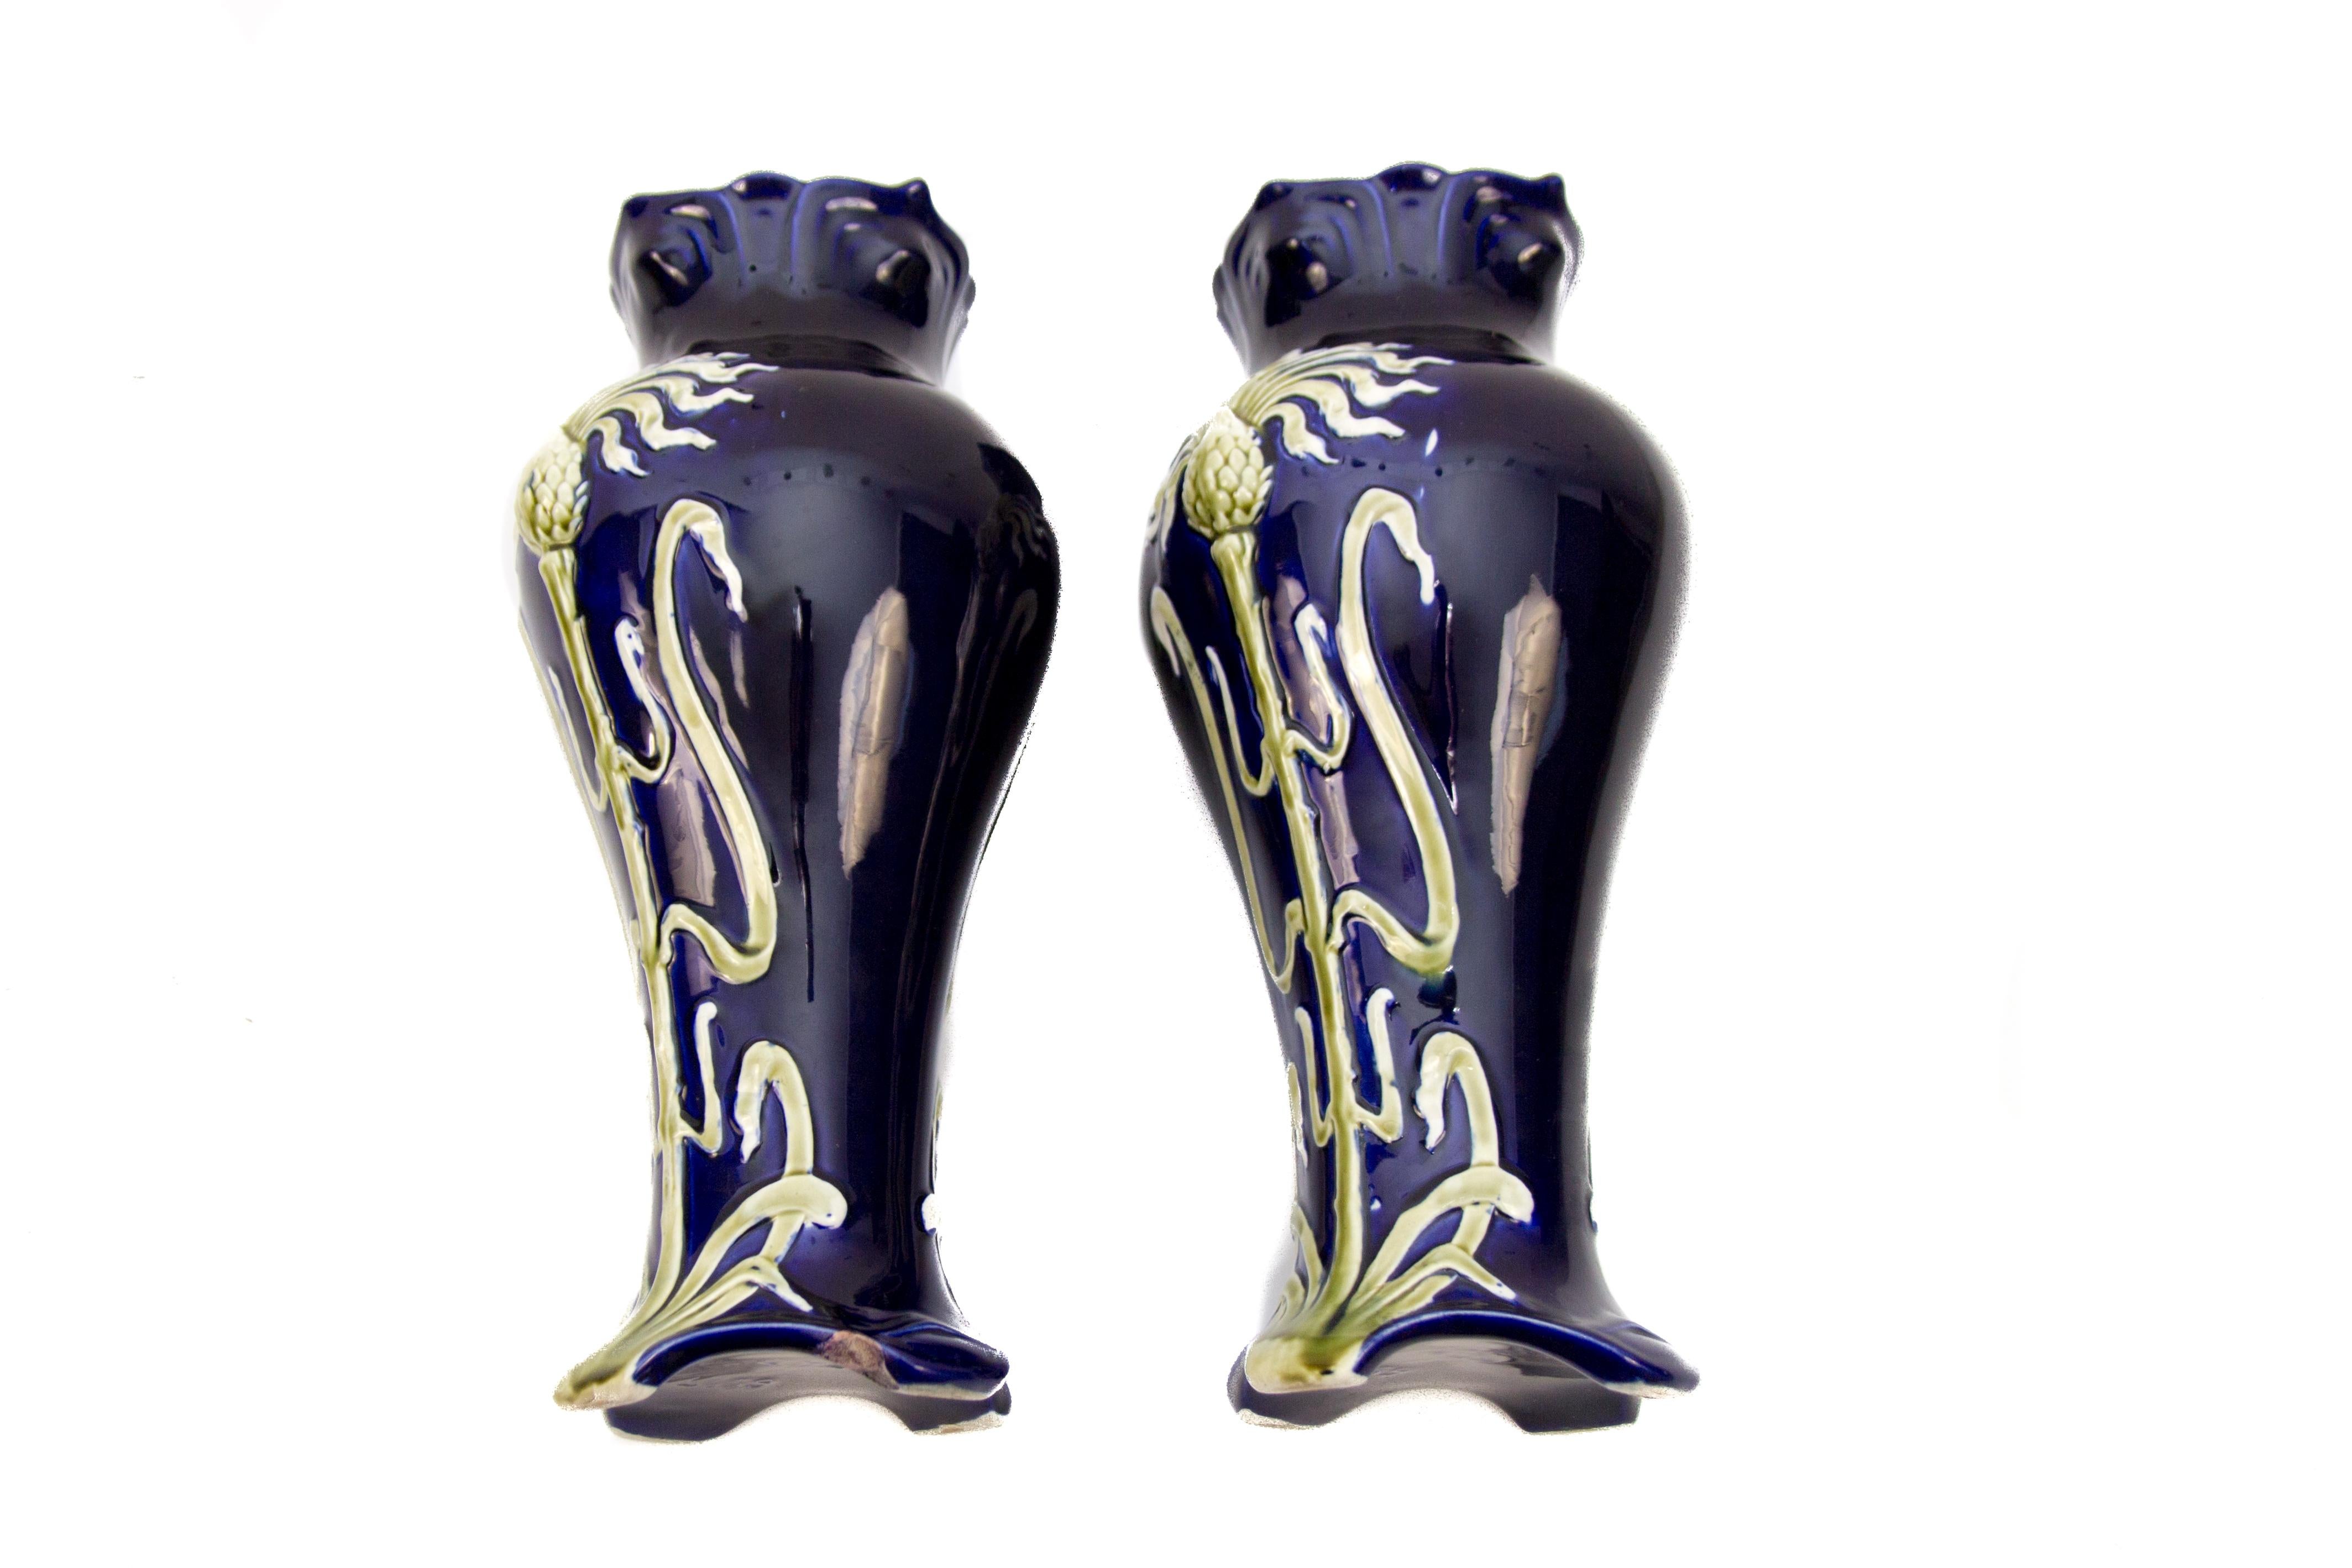 Pair of Early 20th Century French Art Nouveau Vases by J. Bernard De Bruyne 12